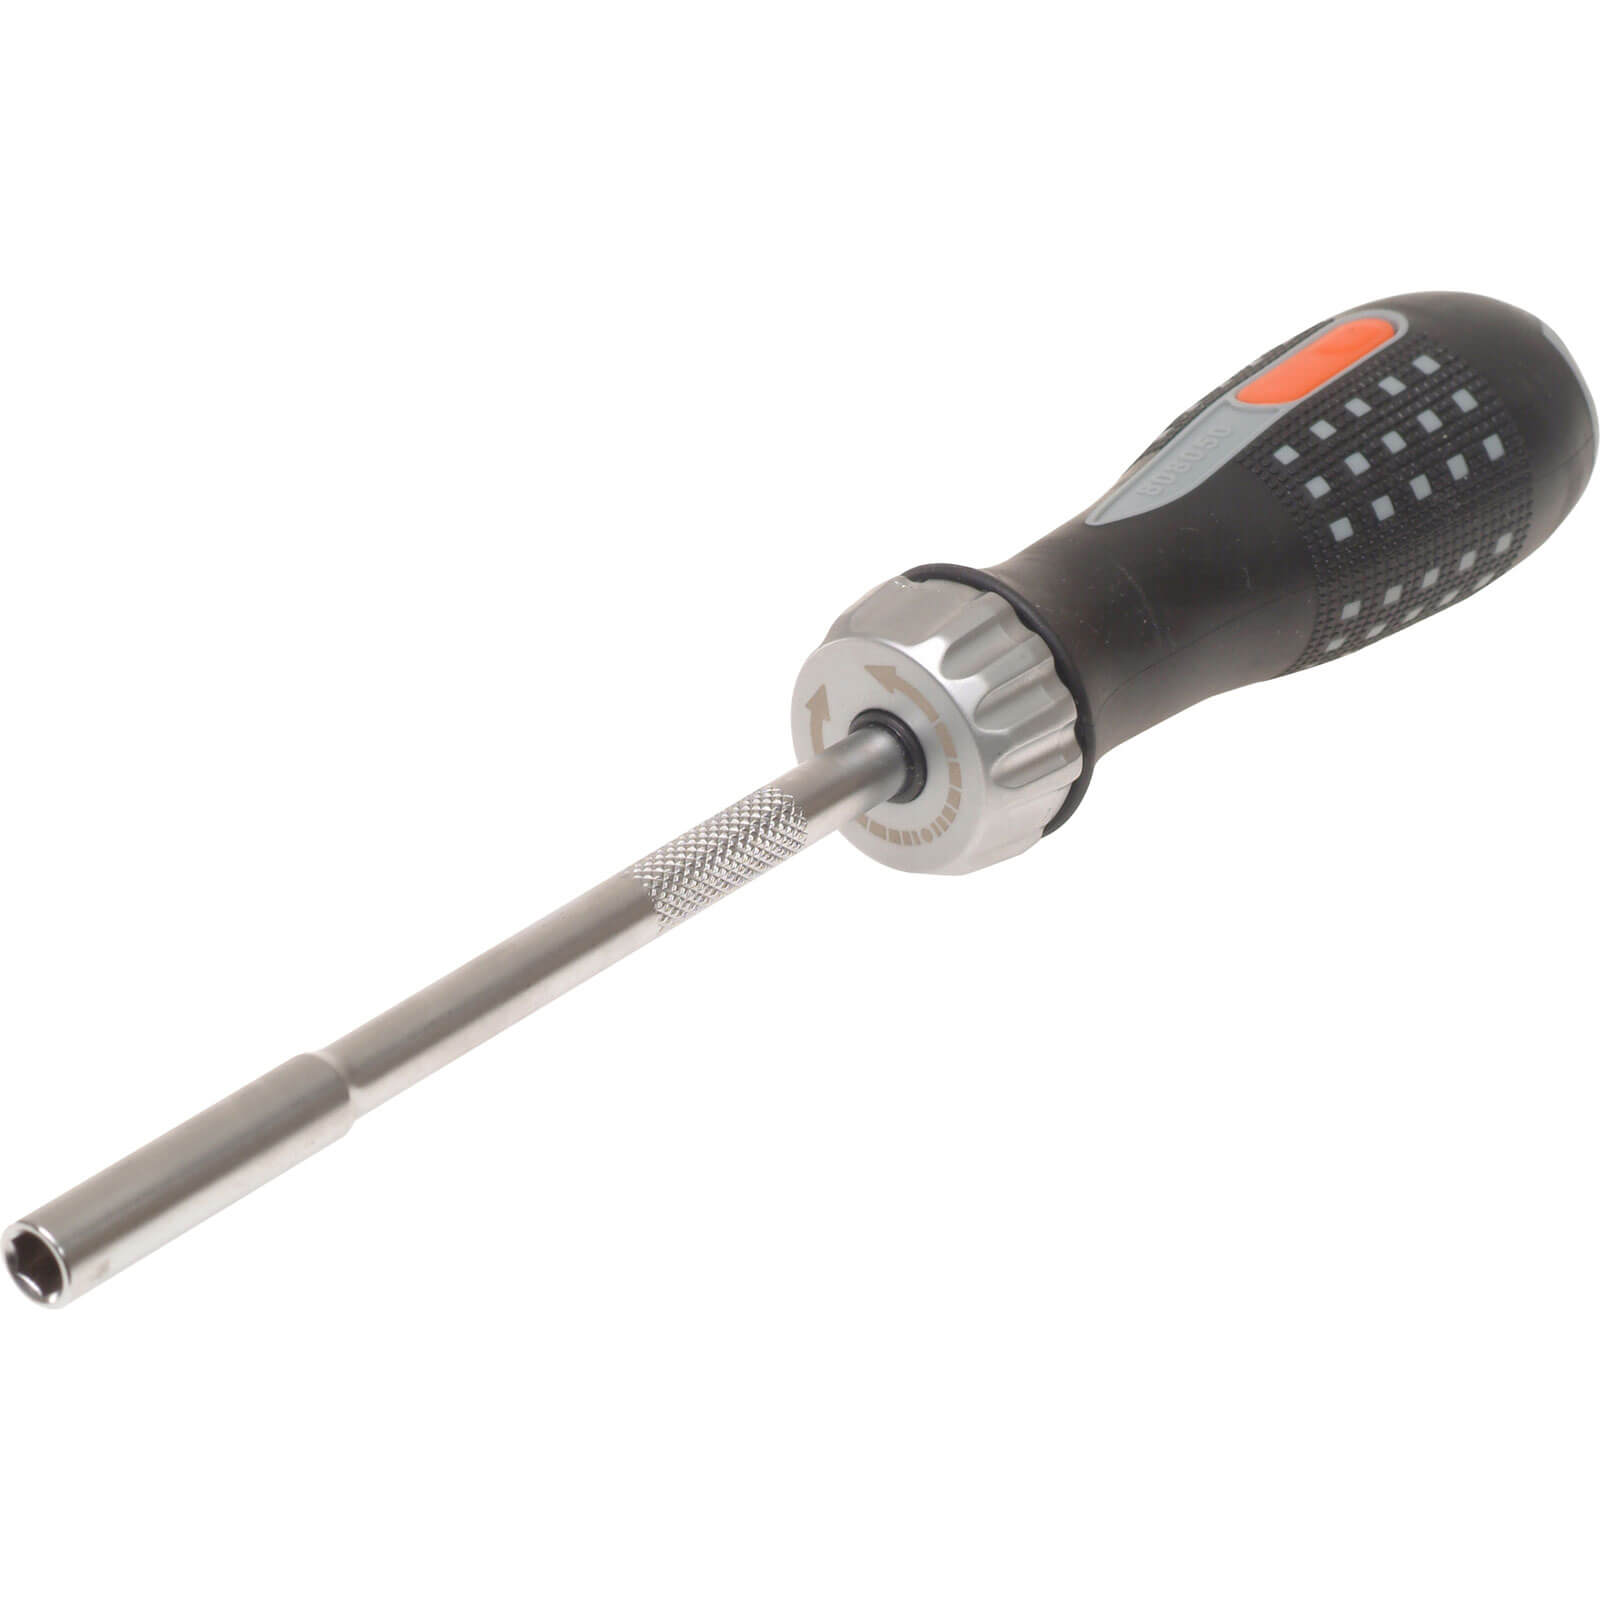 Image of Bahco Ratchet Screwdriver and 6 Screwdriver Bits